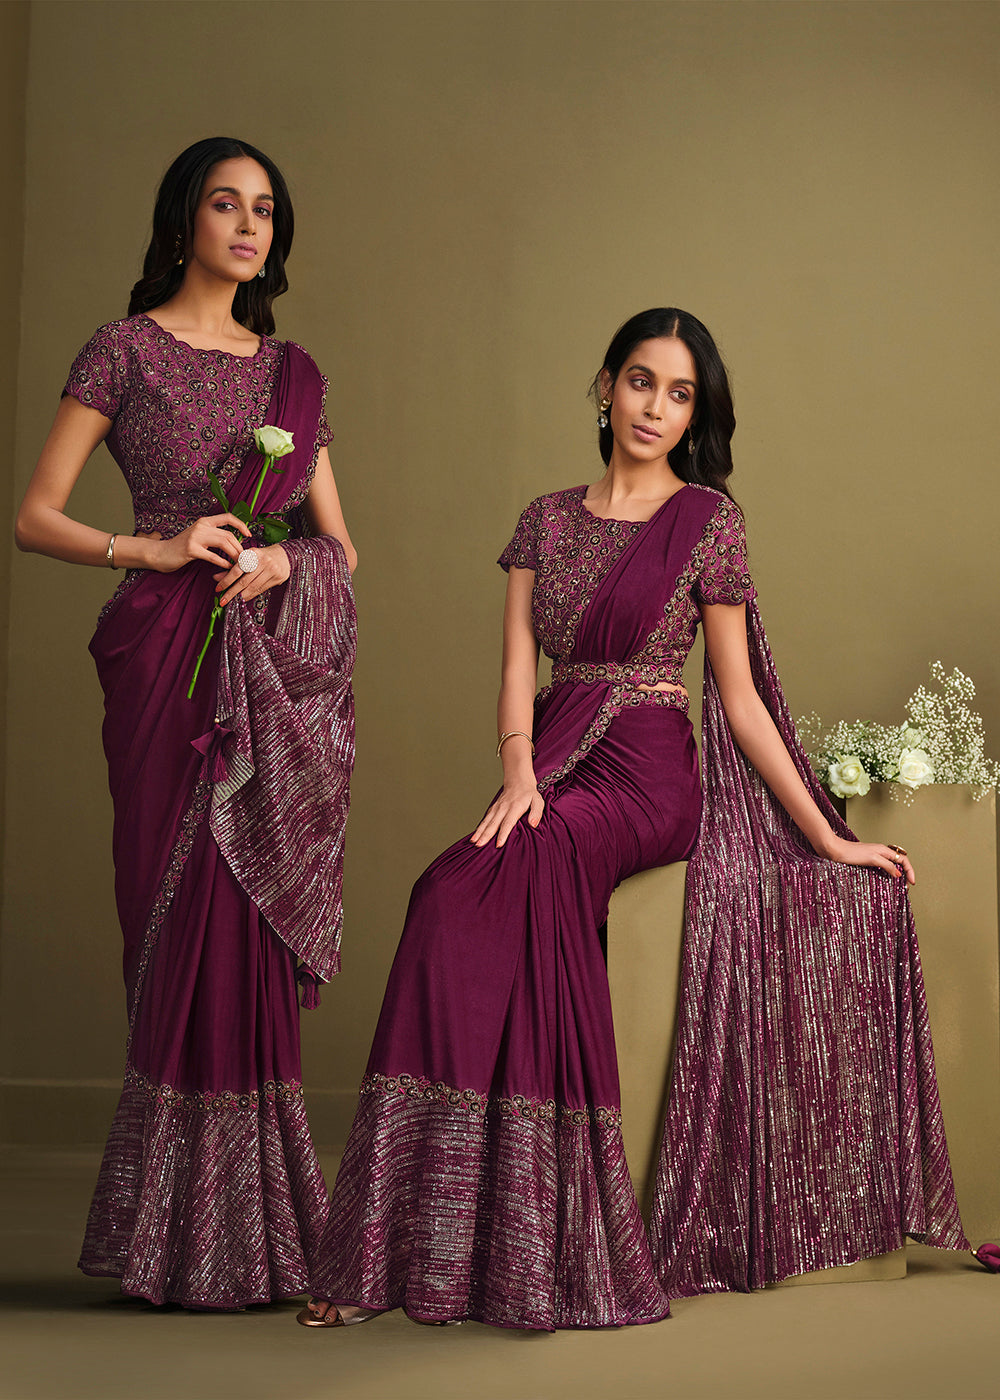 Shop Now Designer Wine Sequined Crystal Silk Ready to Wear Saree from Empress Clothing in USA, UK, Canada & Worldwide. 